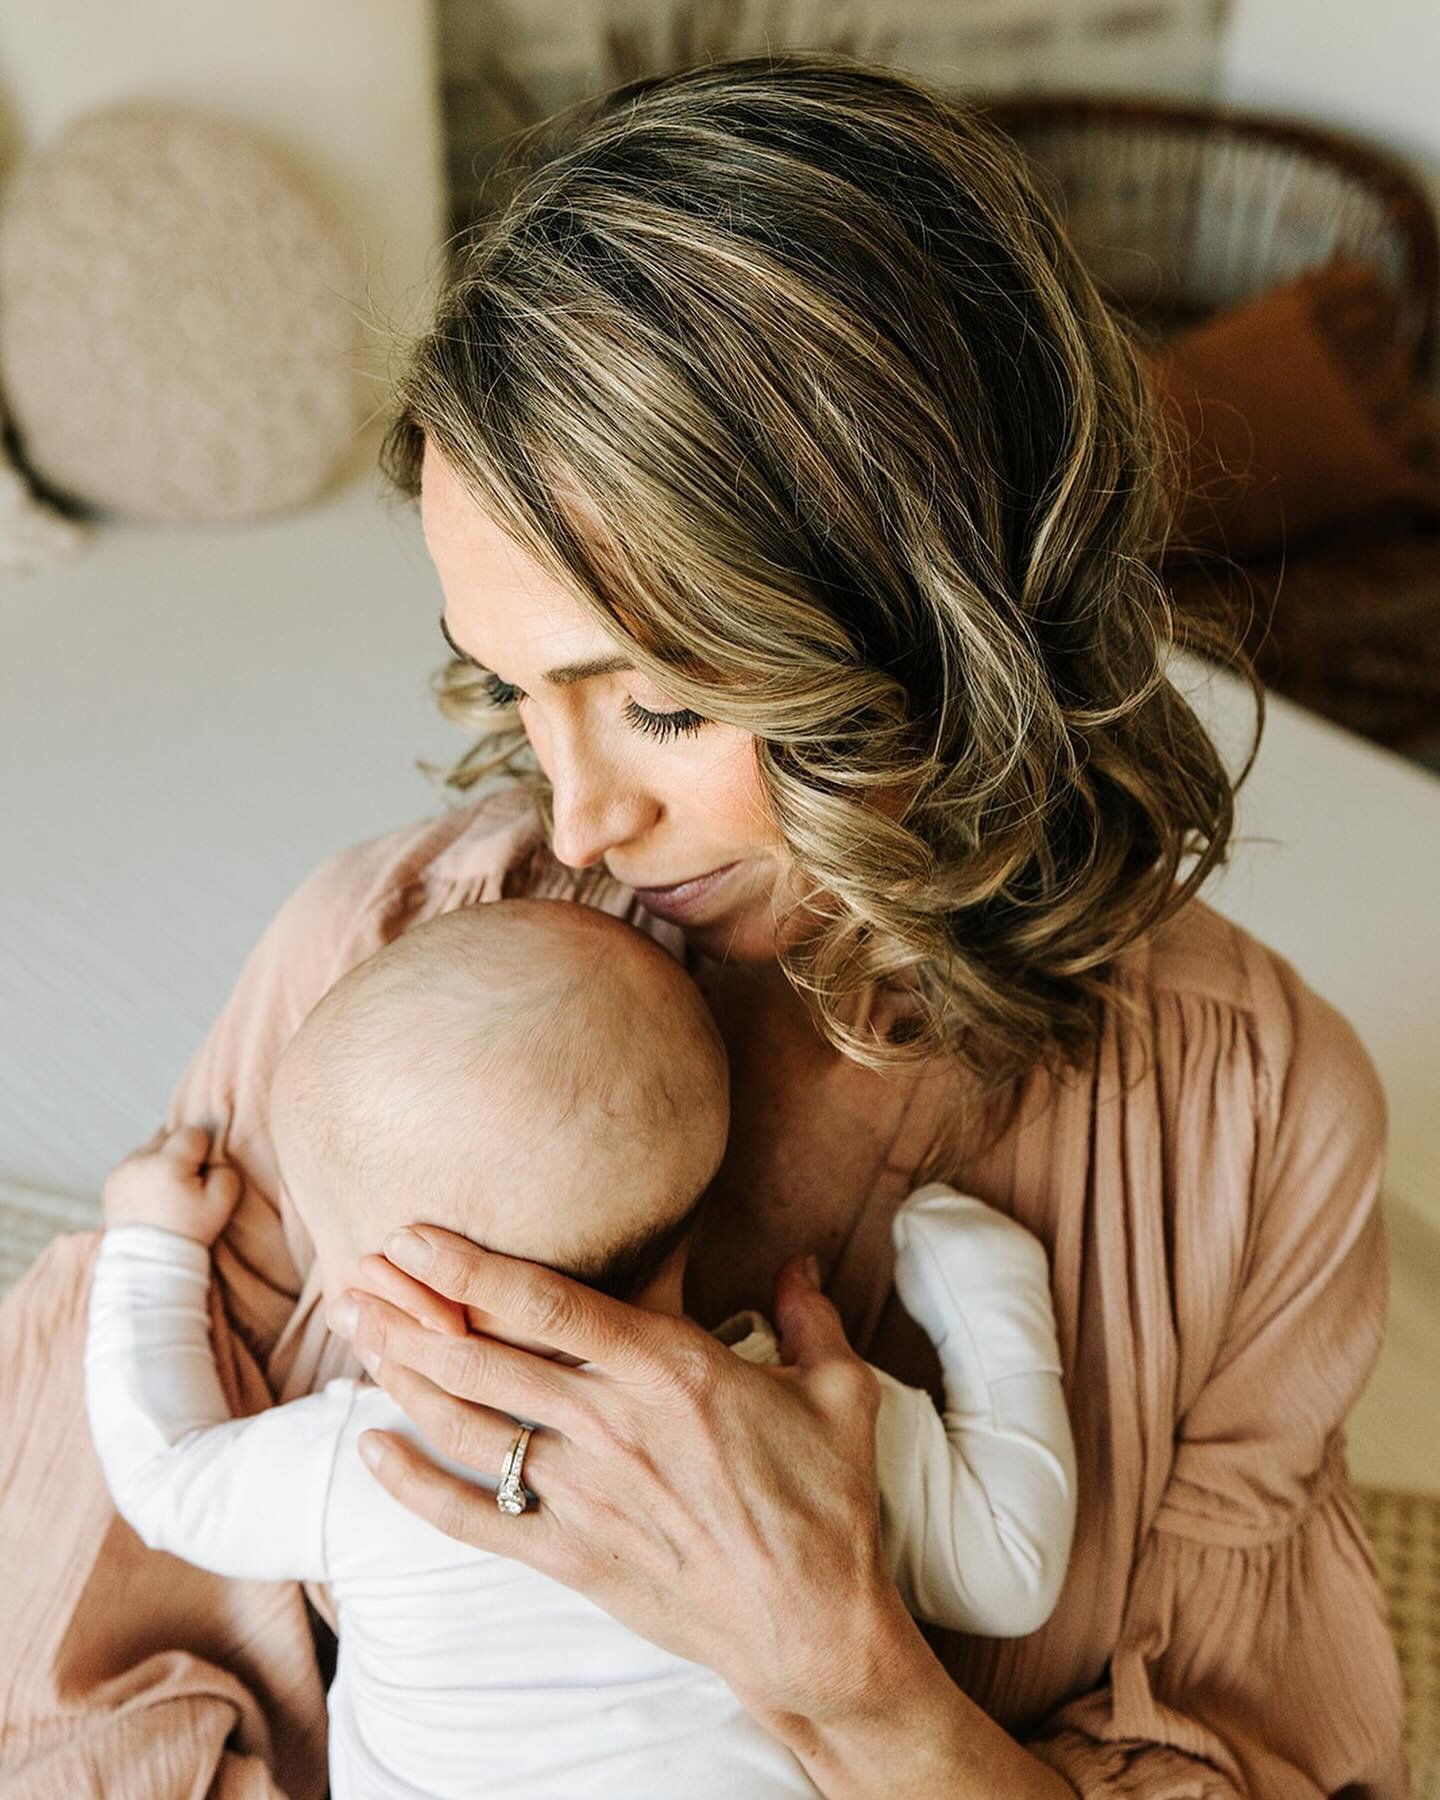 Moms tend to be the ones behind the scenes, creating the magic, capturing the memories, coordinating the chaos&hellip; which often means they don&rsquo;t get those precious pictures with their babies! We love working with @londonadelaidephotography t